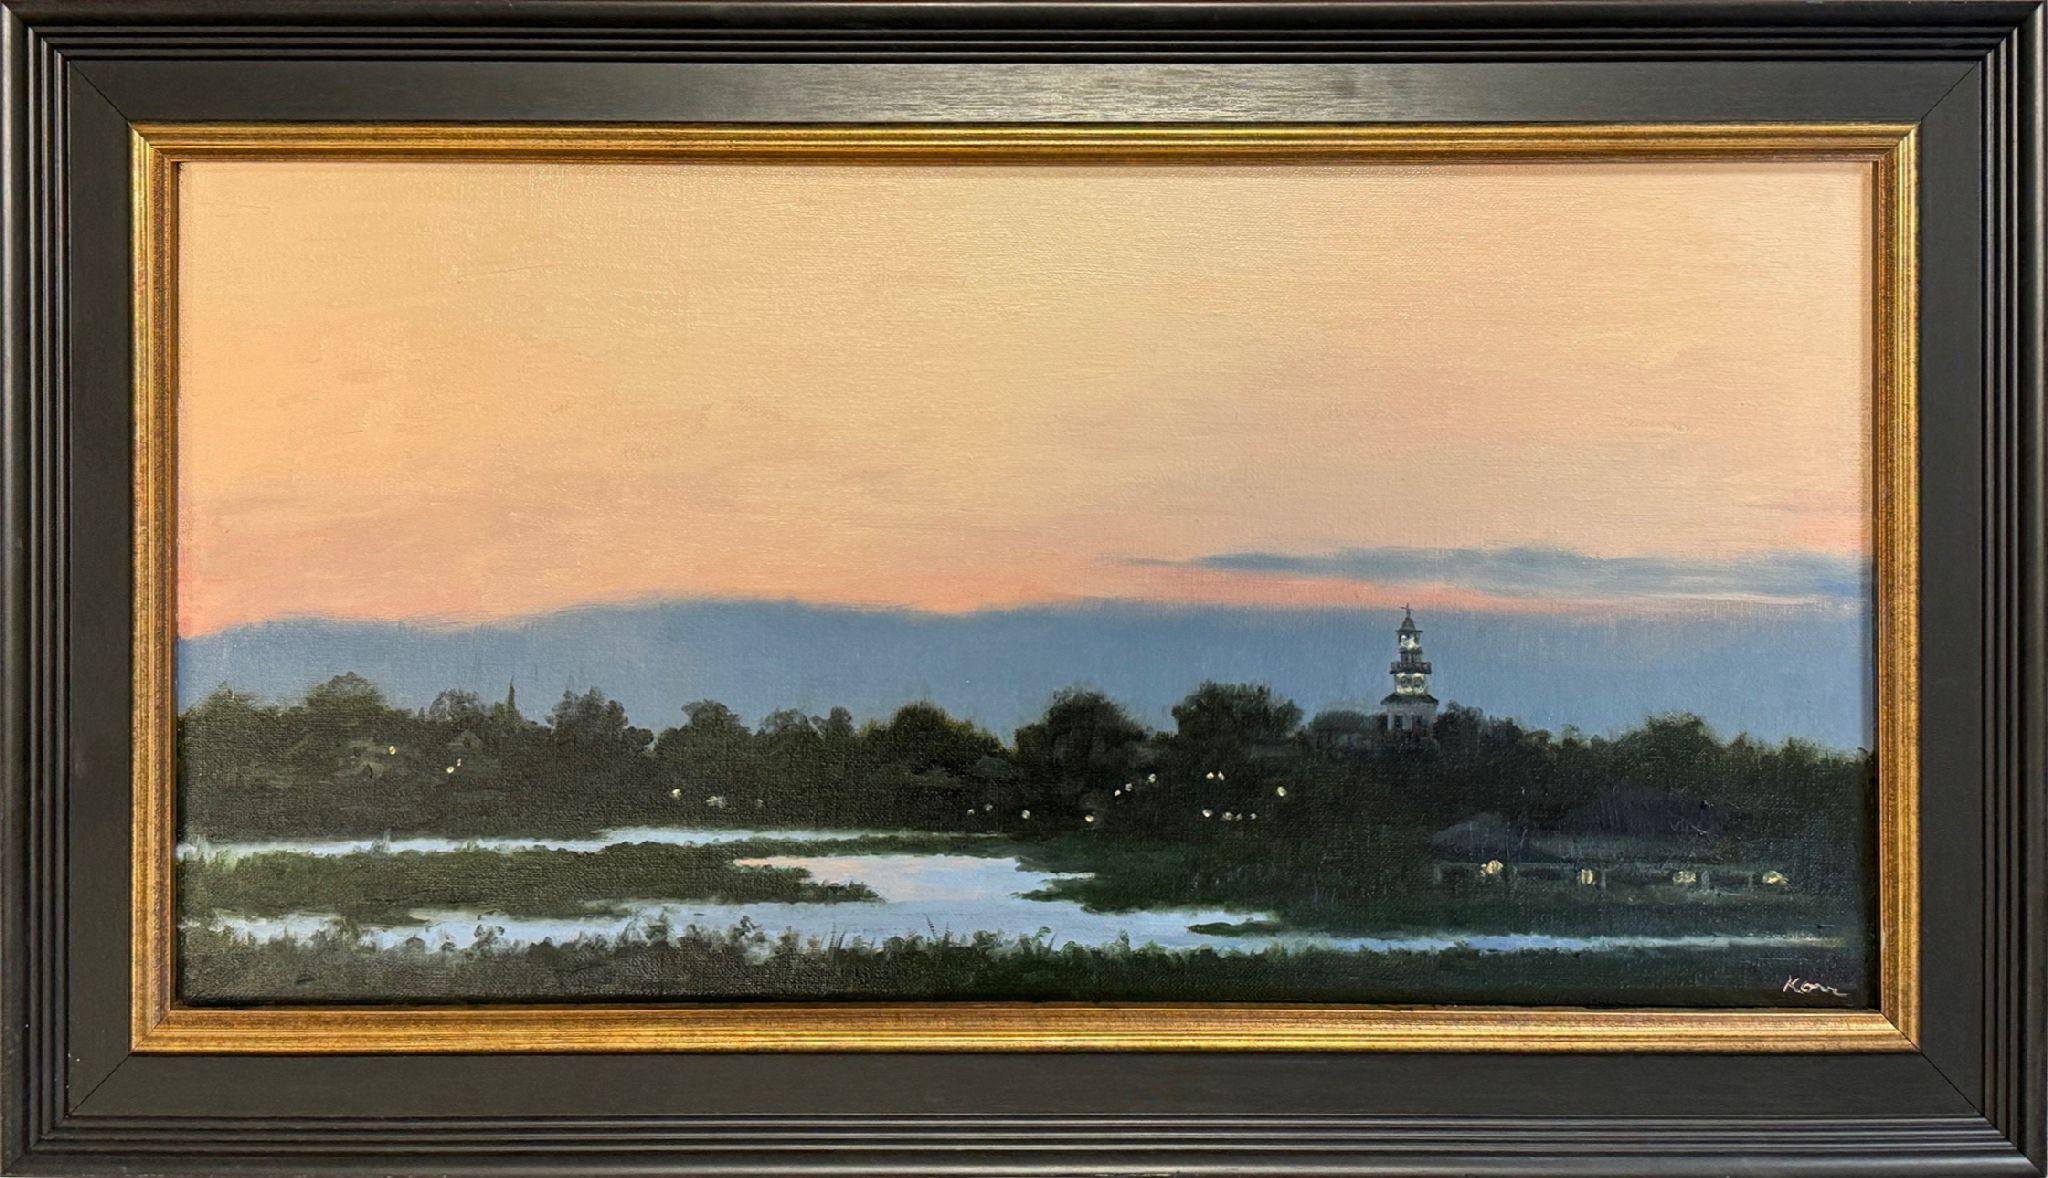 Dusk, View of Town from the Creeks - Painting by Marla Korr